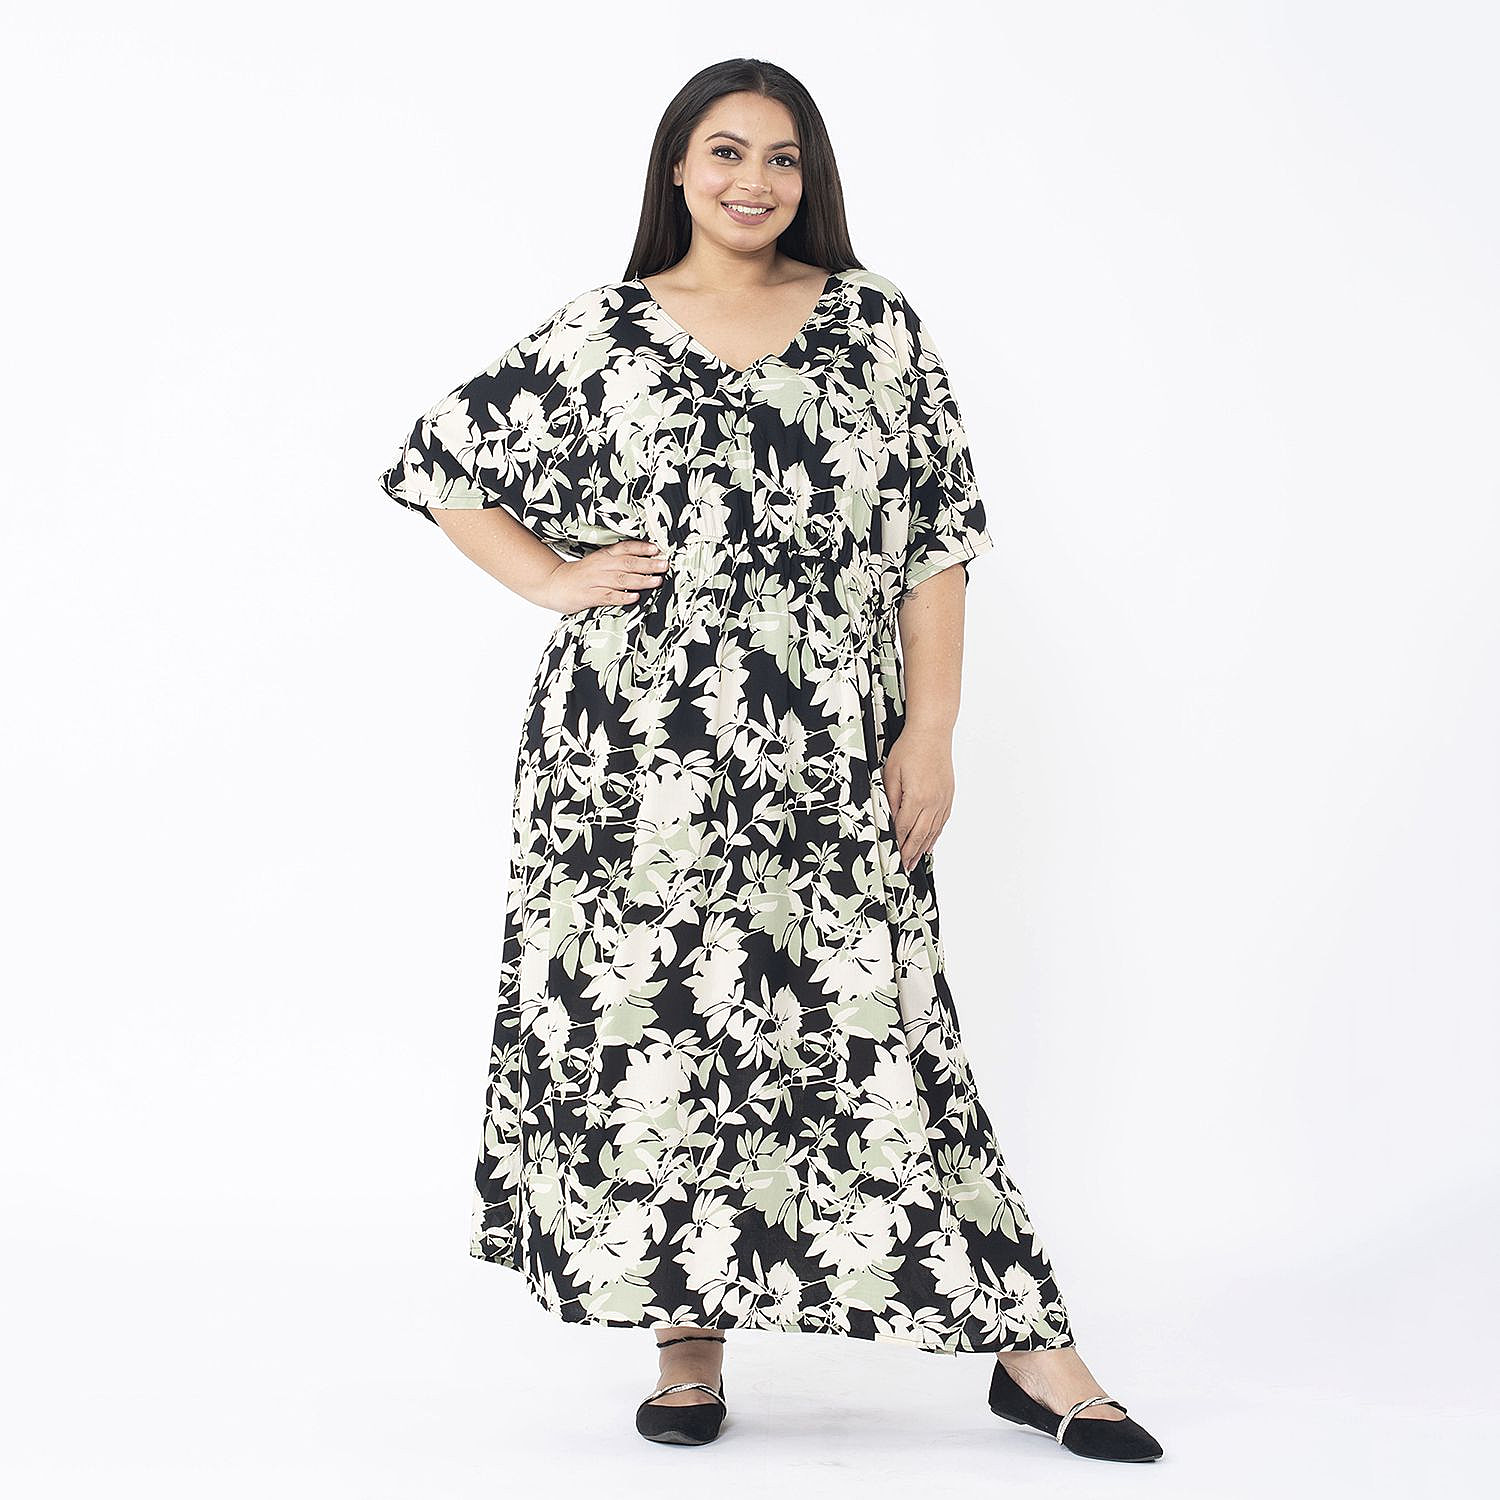 Tamsy Floral Printed Dress (One Size) - Black